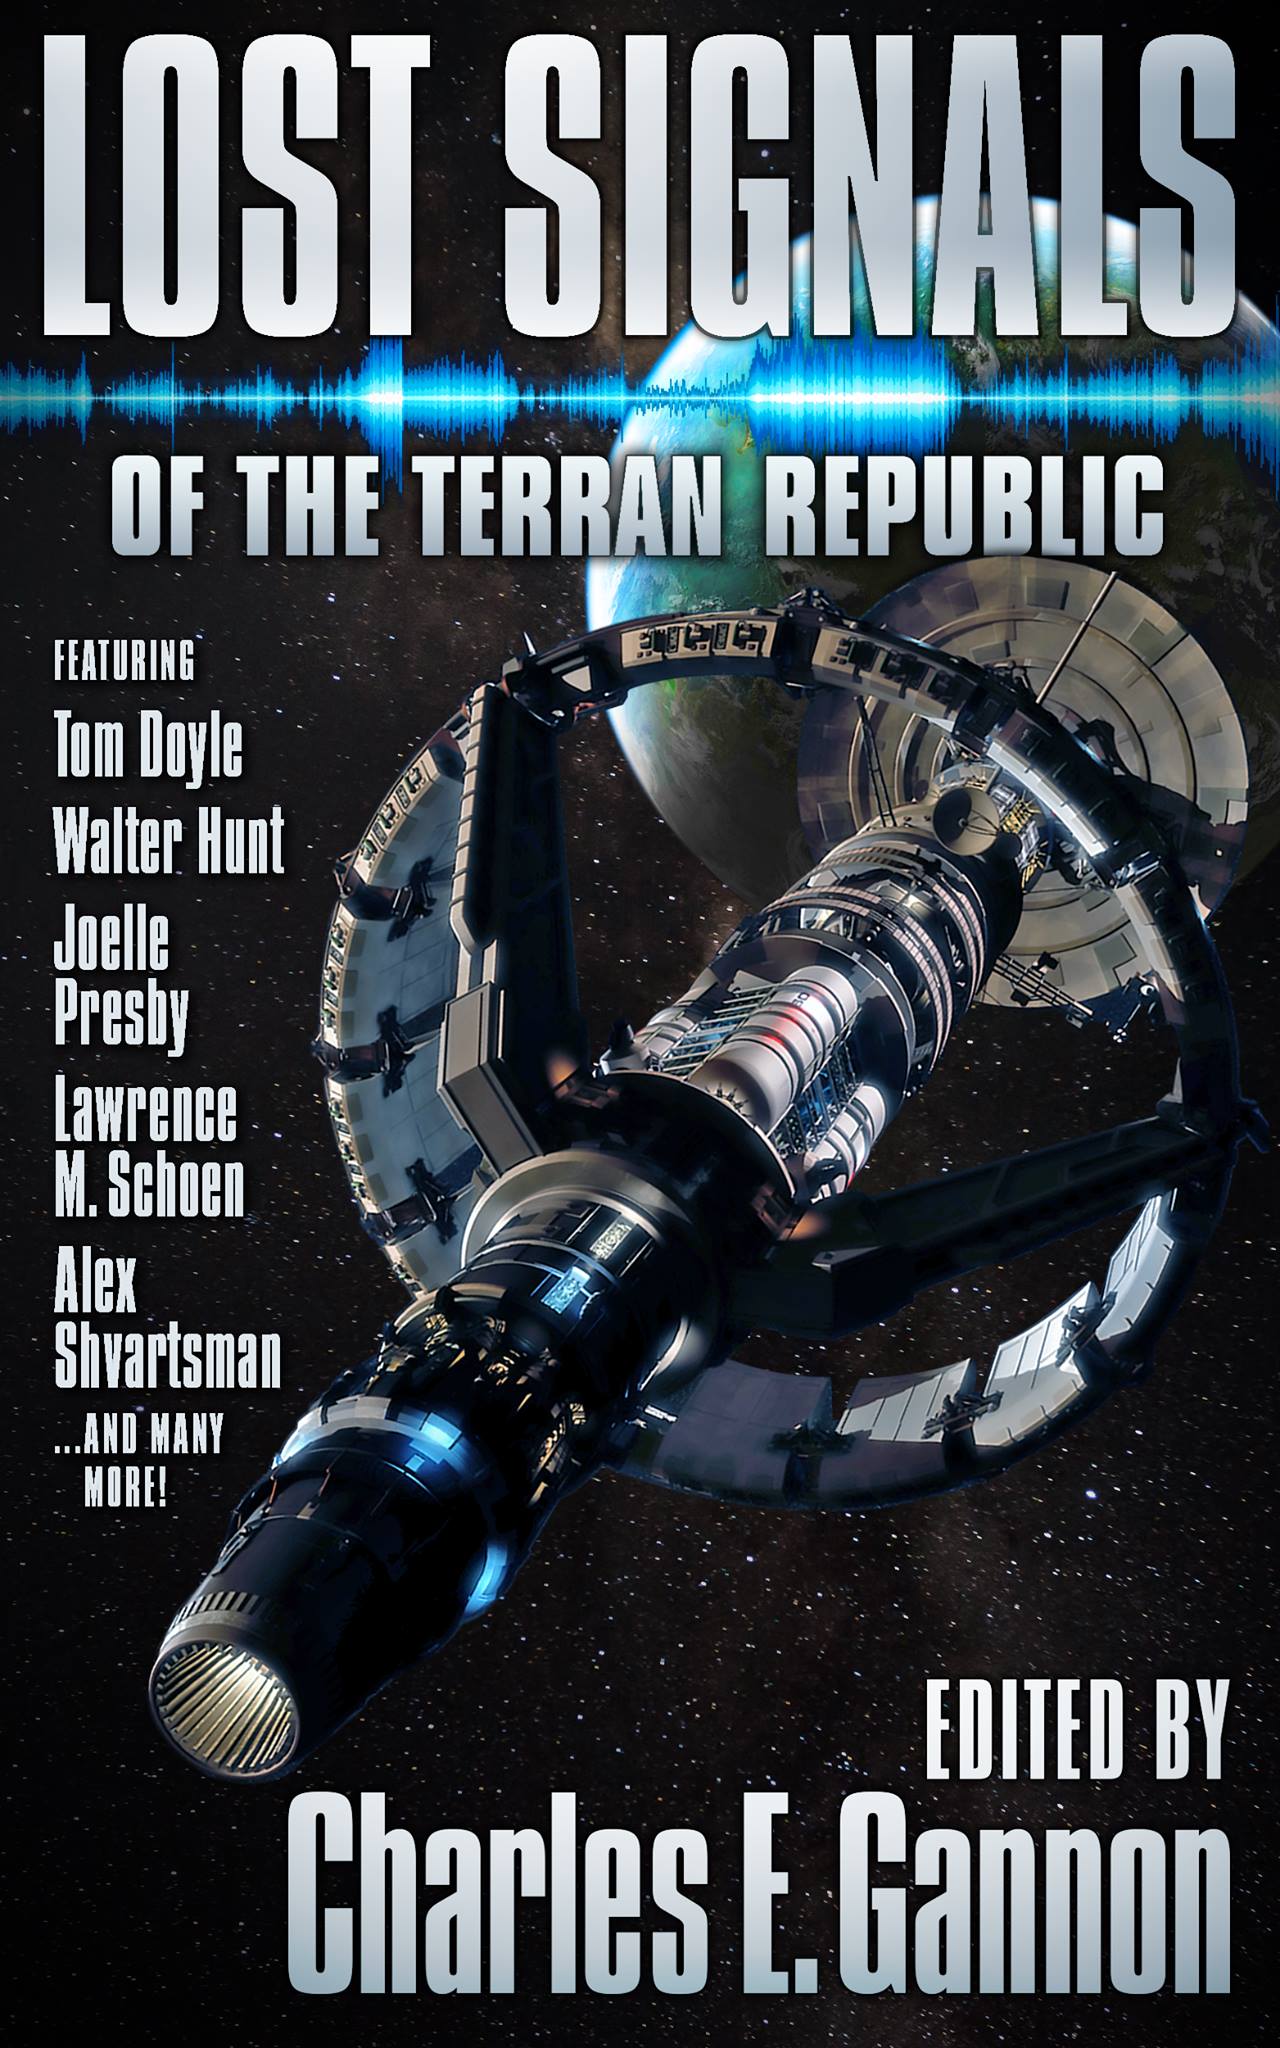 "Lost Signals of the Terran Republic" contains Vonnie's story, "From the Stars."